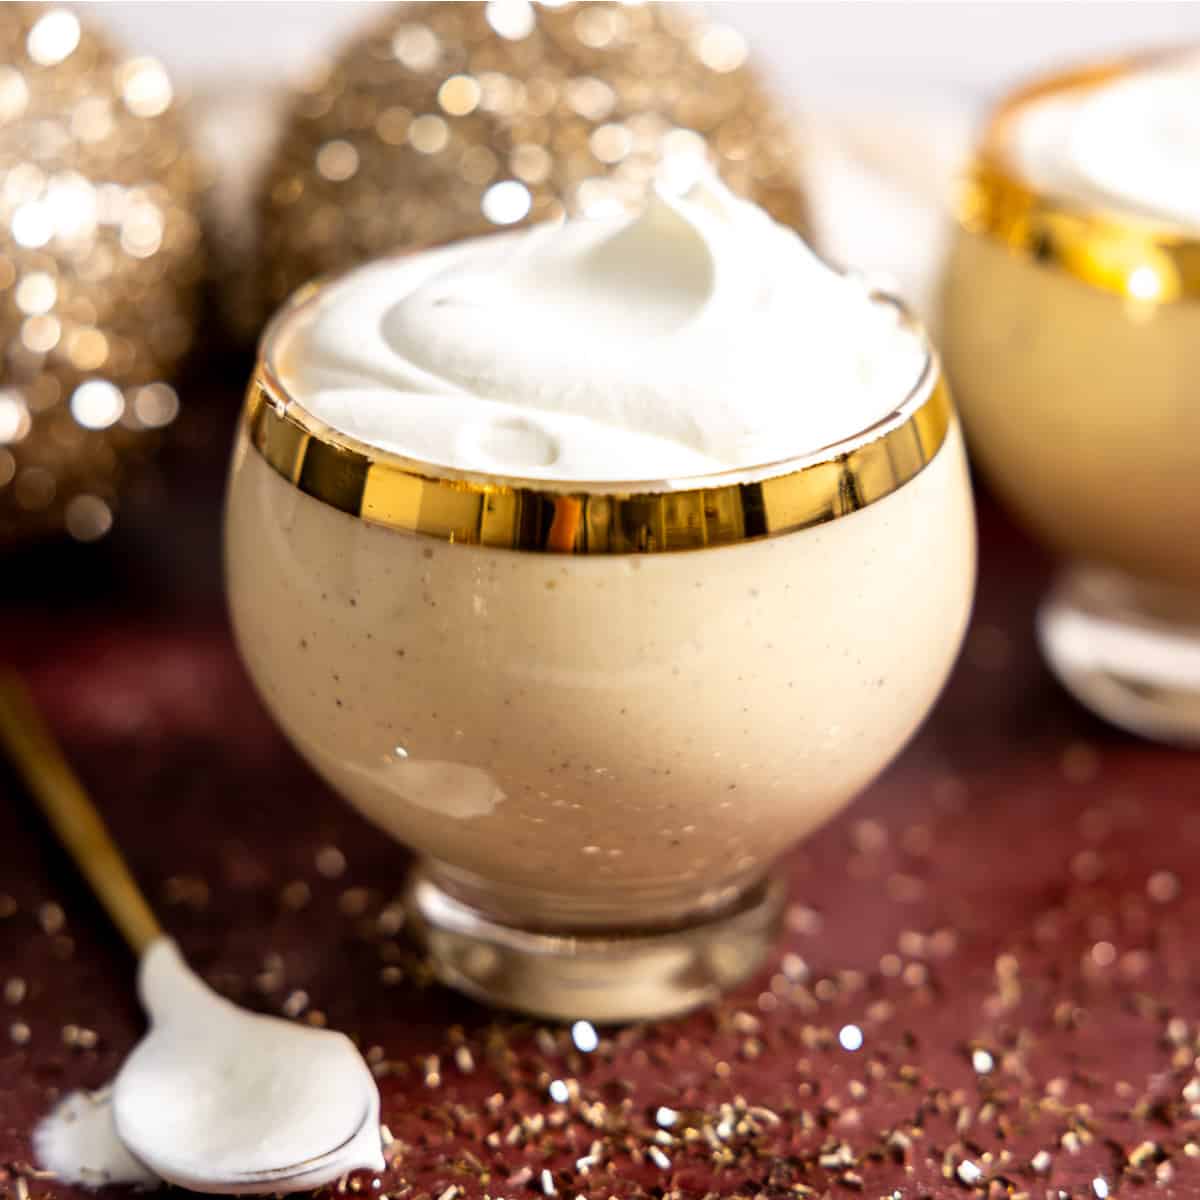 Glass filled with eggnog and topped with whipped cream.